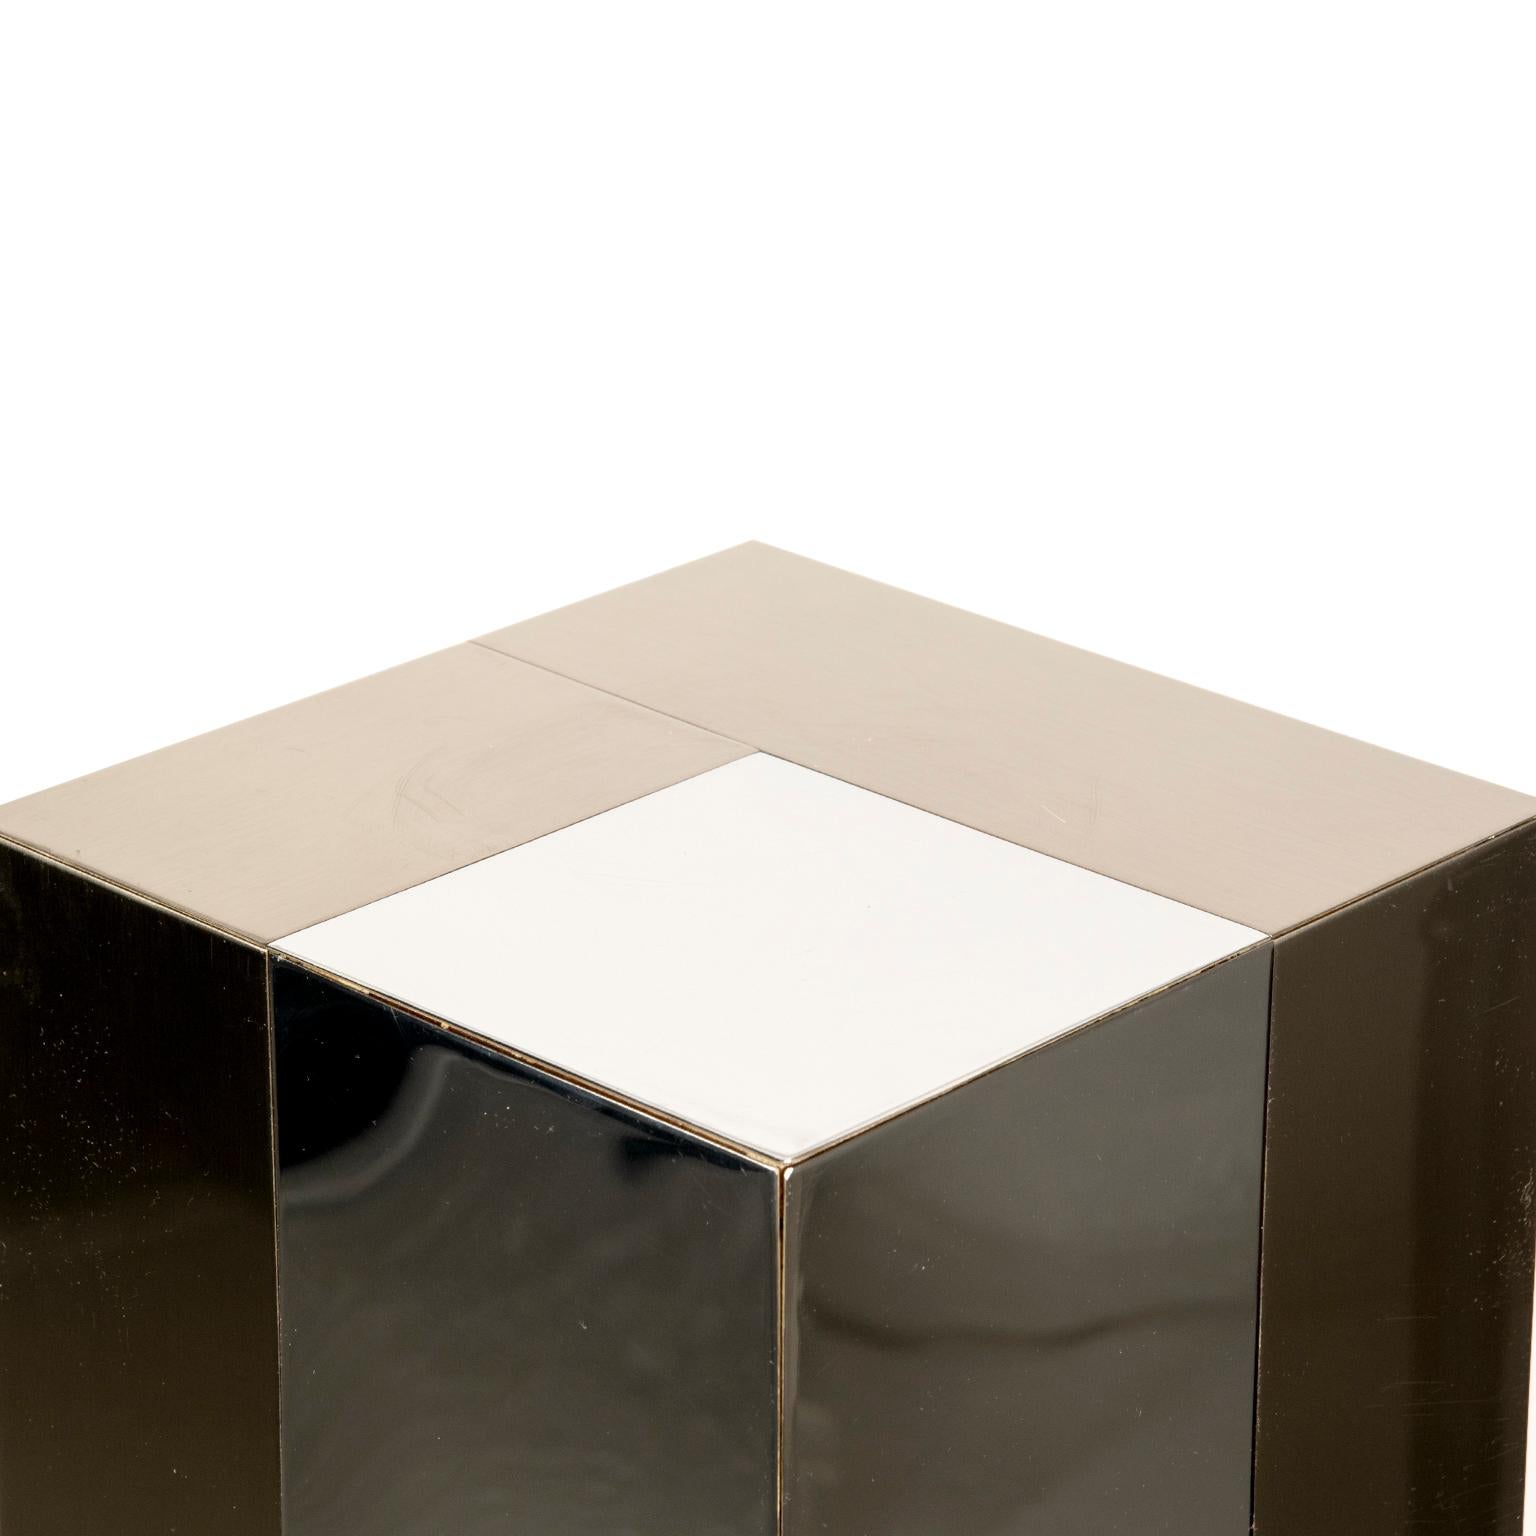 Hand-Crafted Stainless Steel Pedestal Attributed to Paul Evans